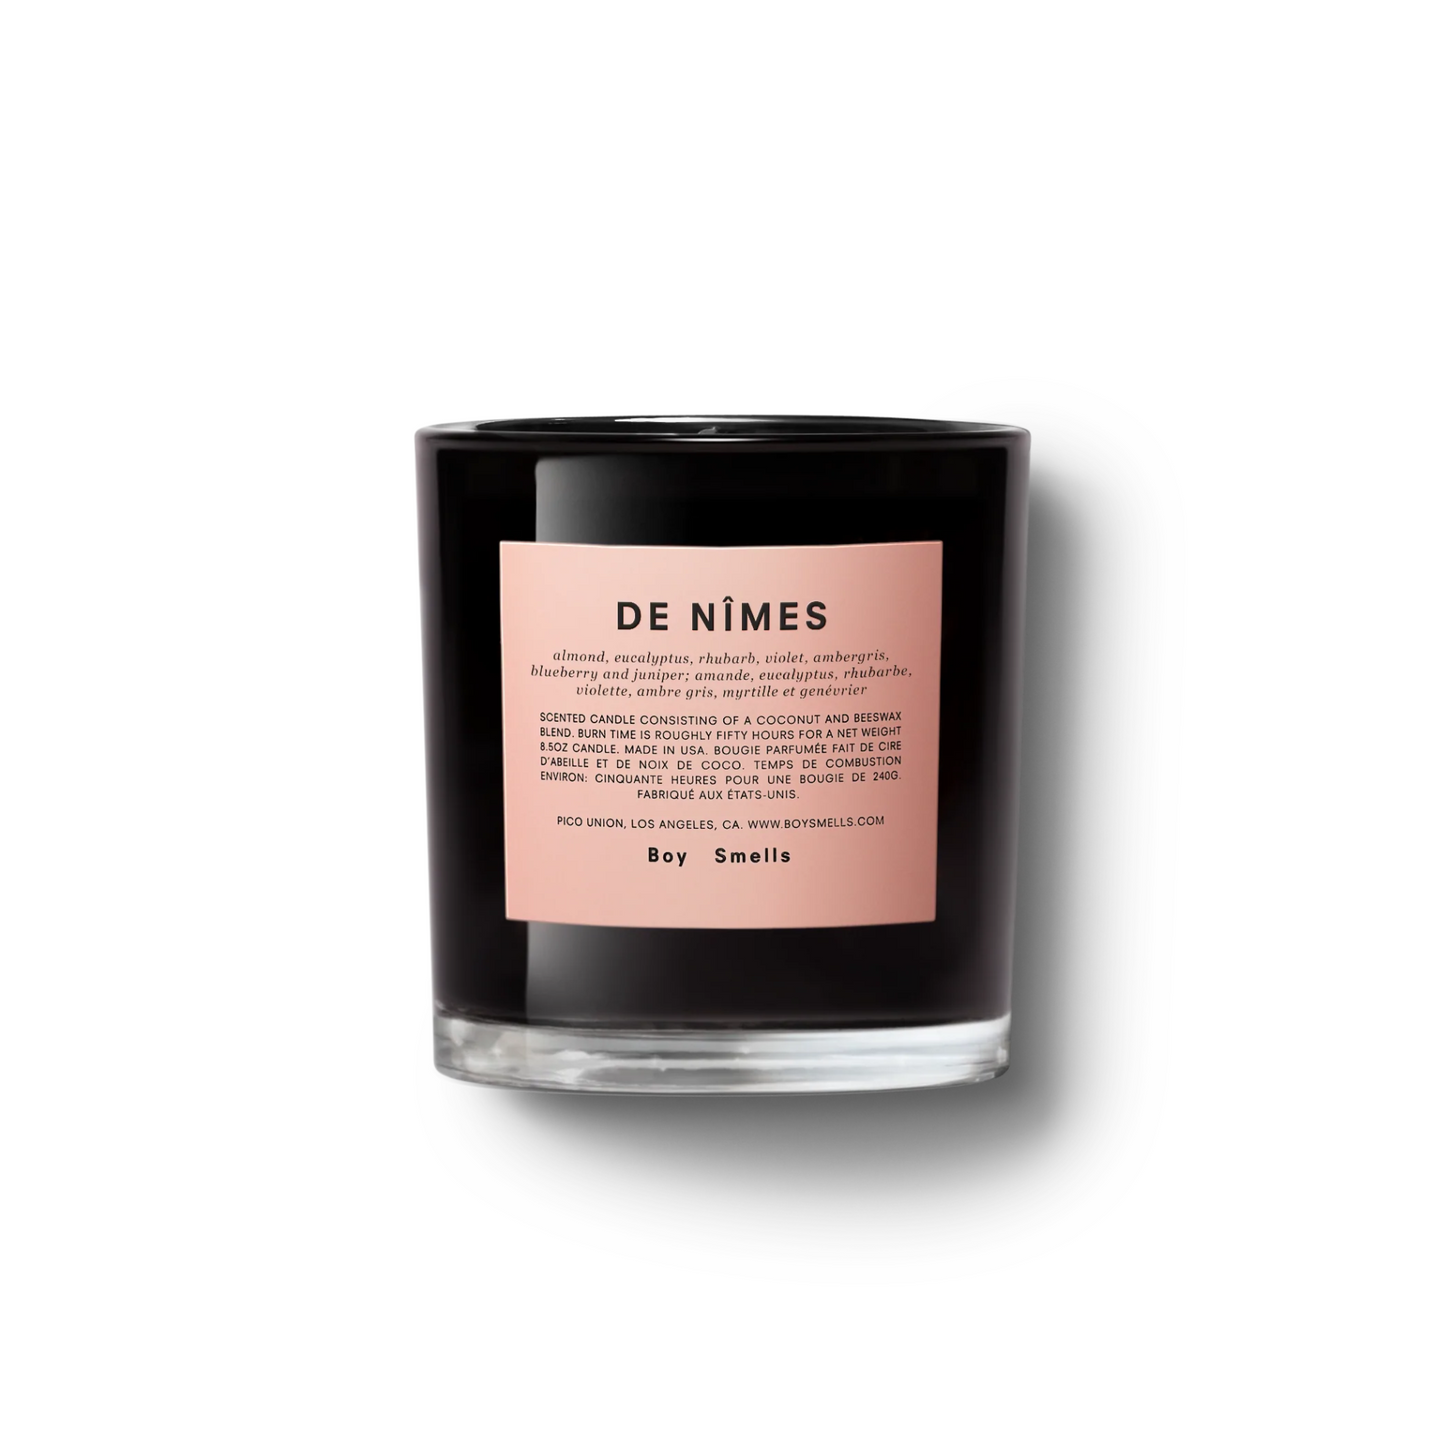 Primary Image of De Nimes Candle